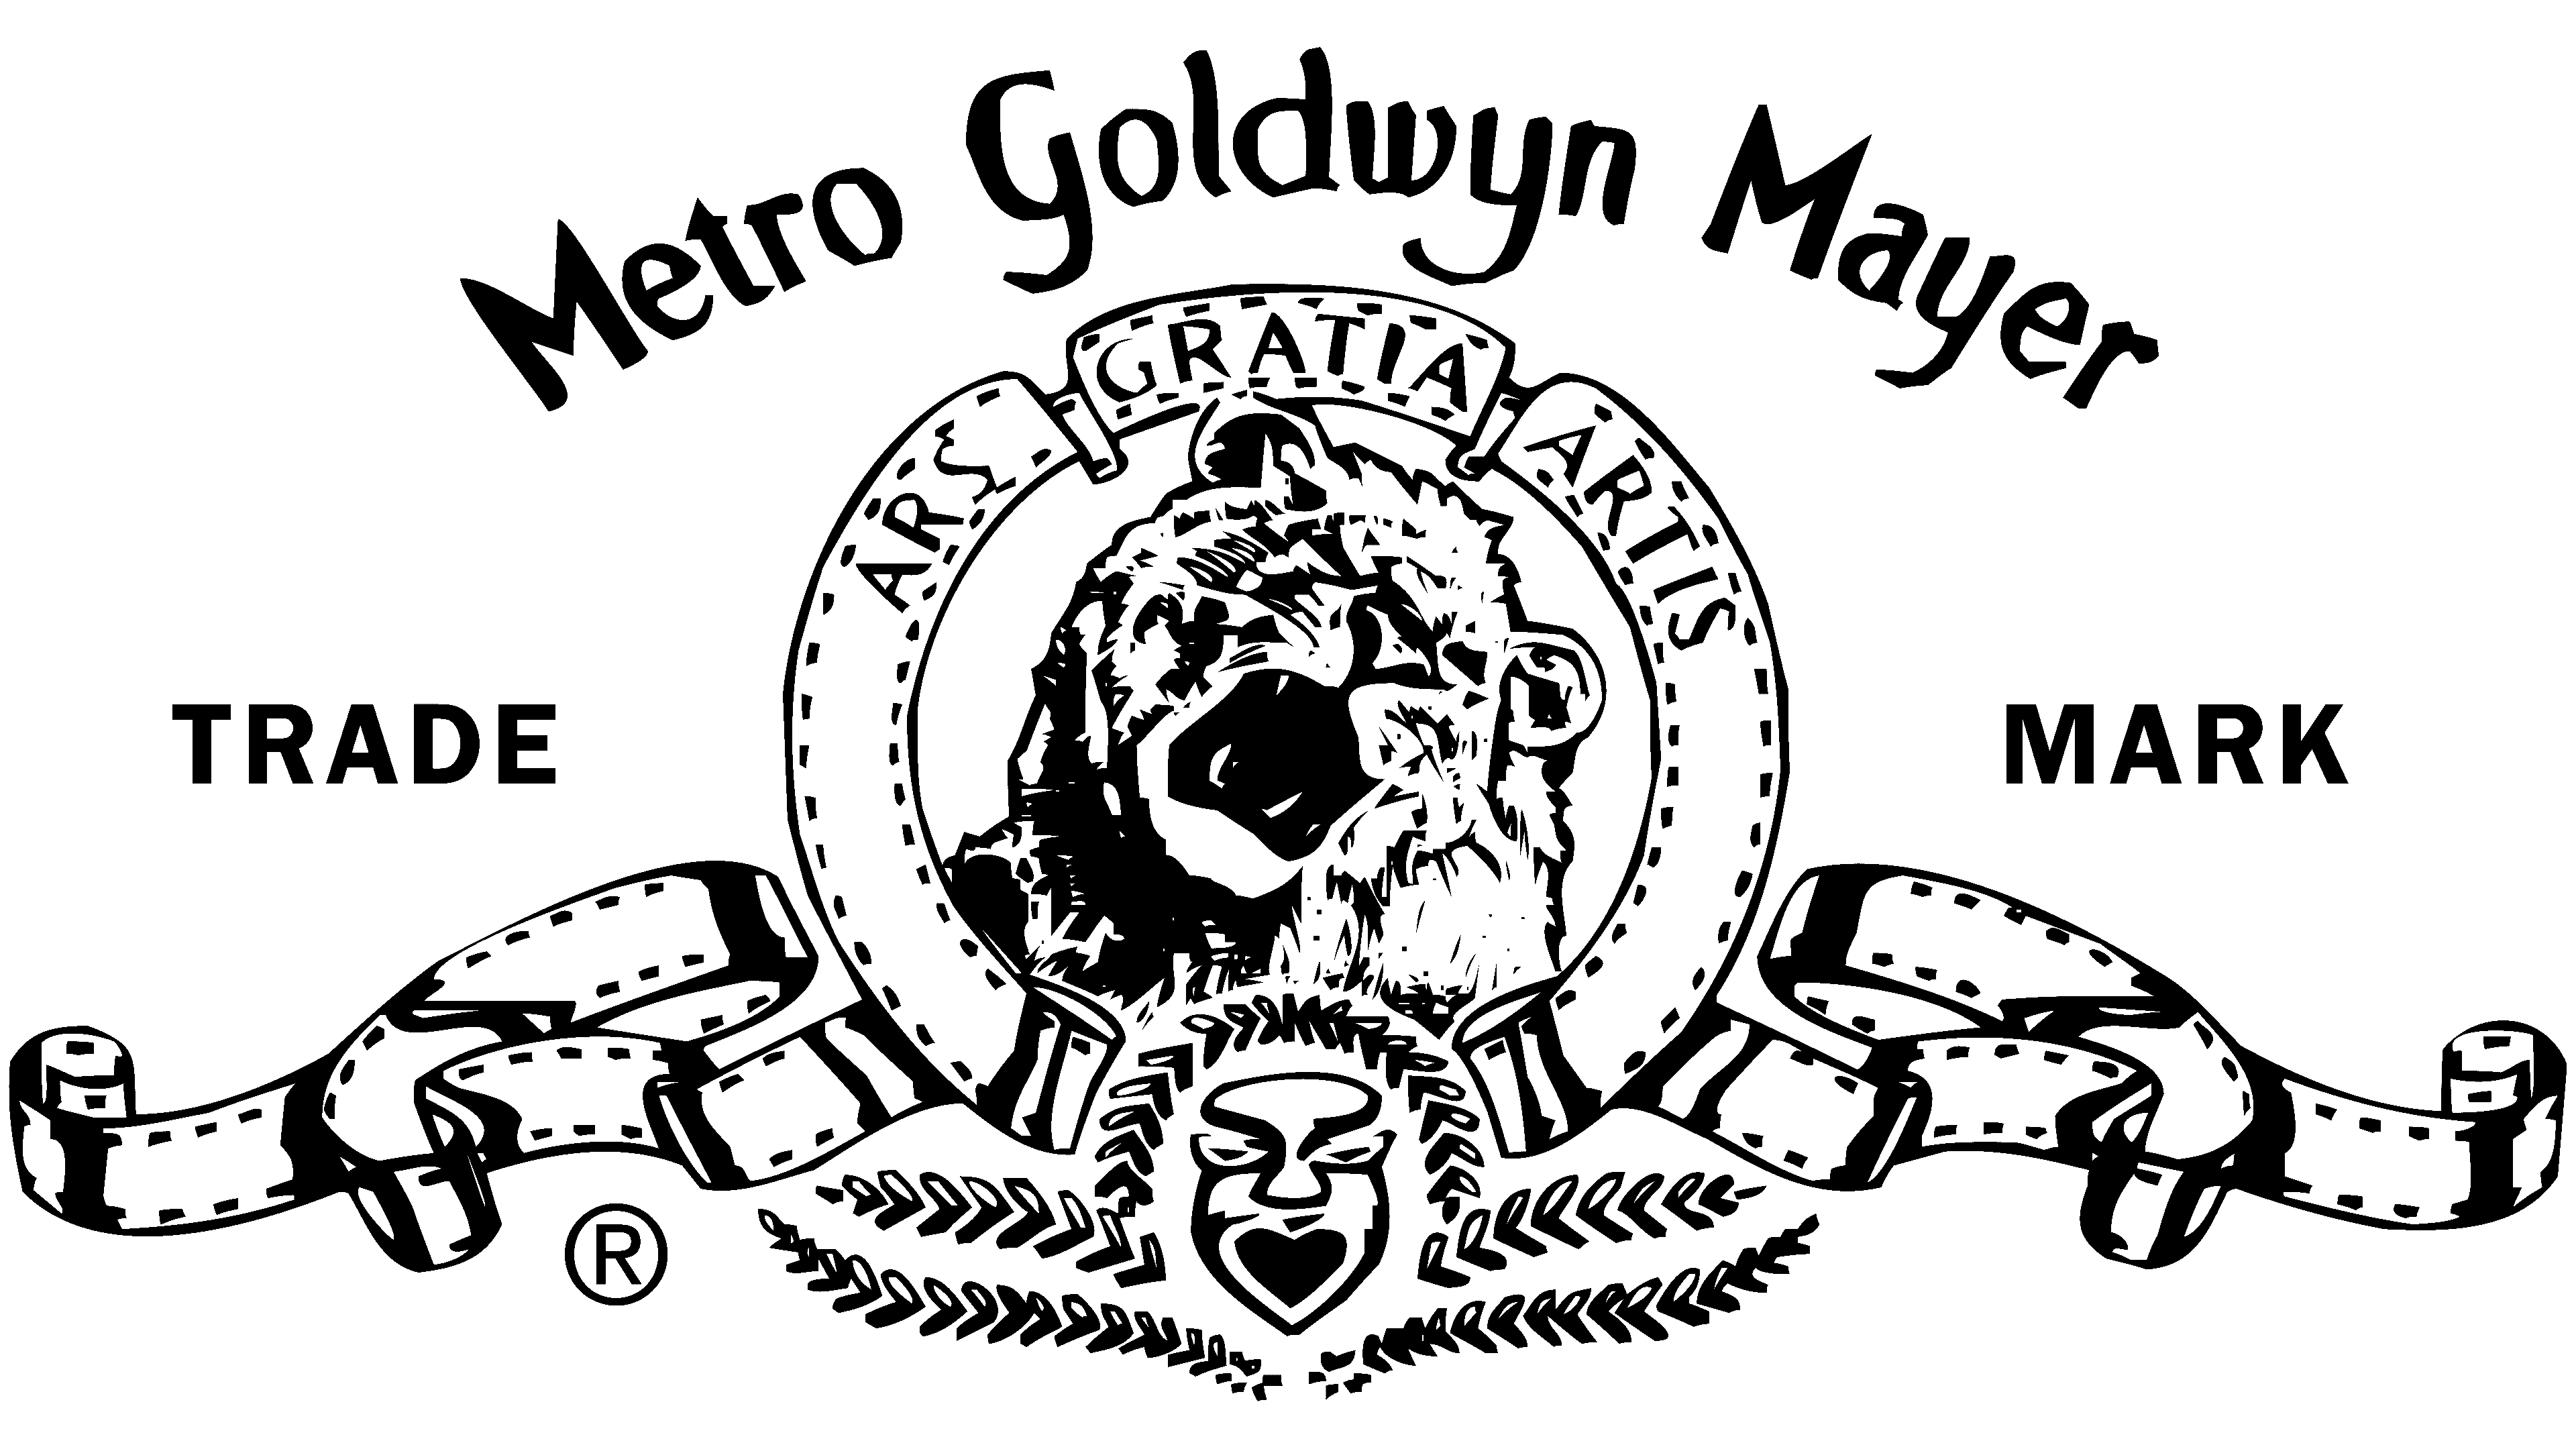 MGM (Metro Goldwyn Mayer) Logo, meaning, history, PNG, SVG, vector